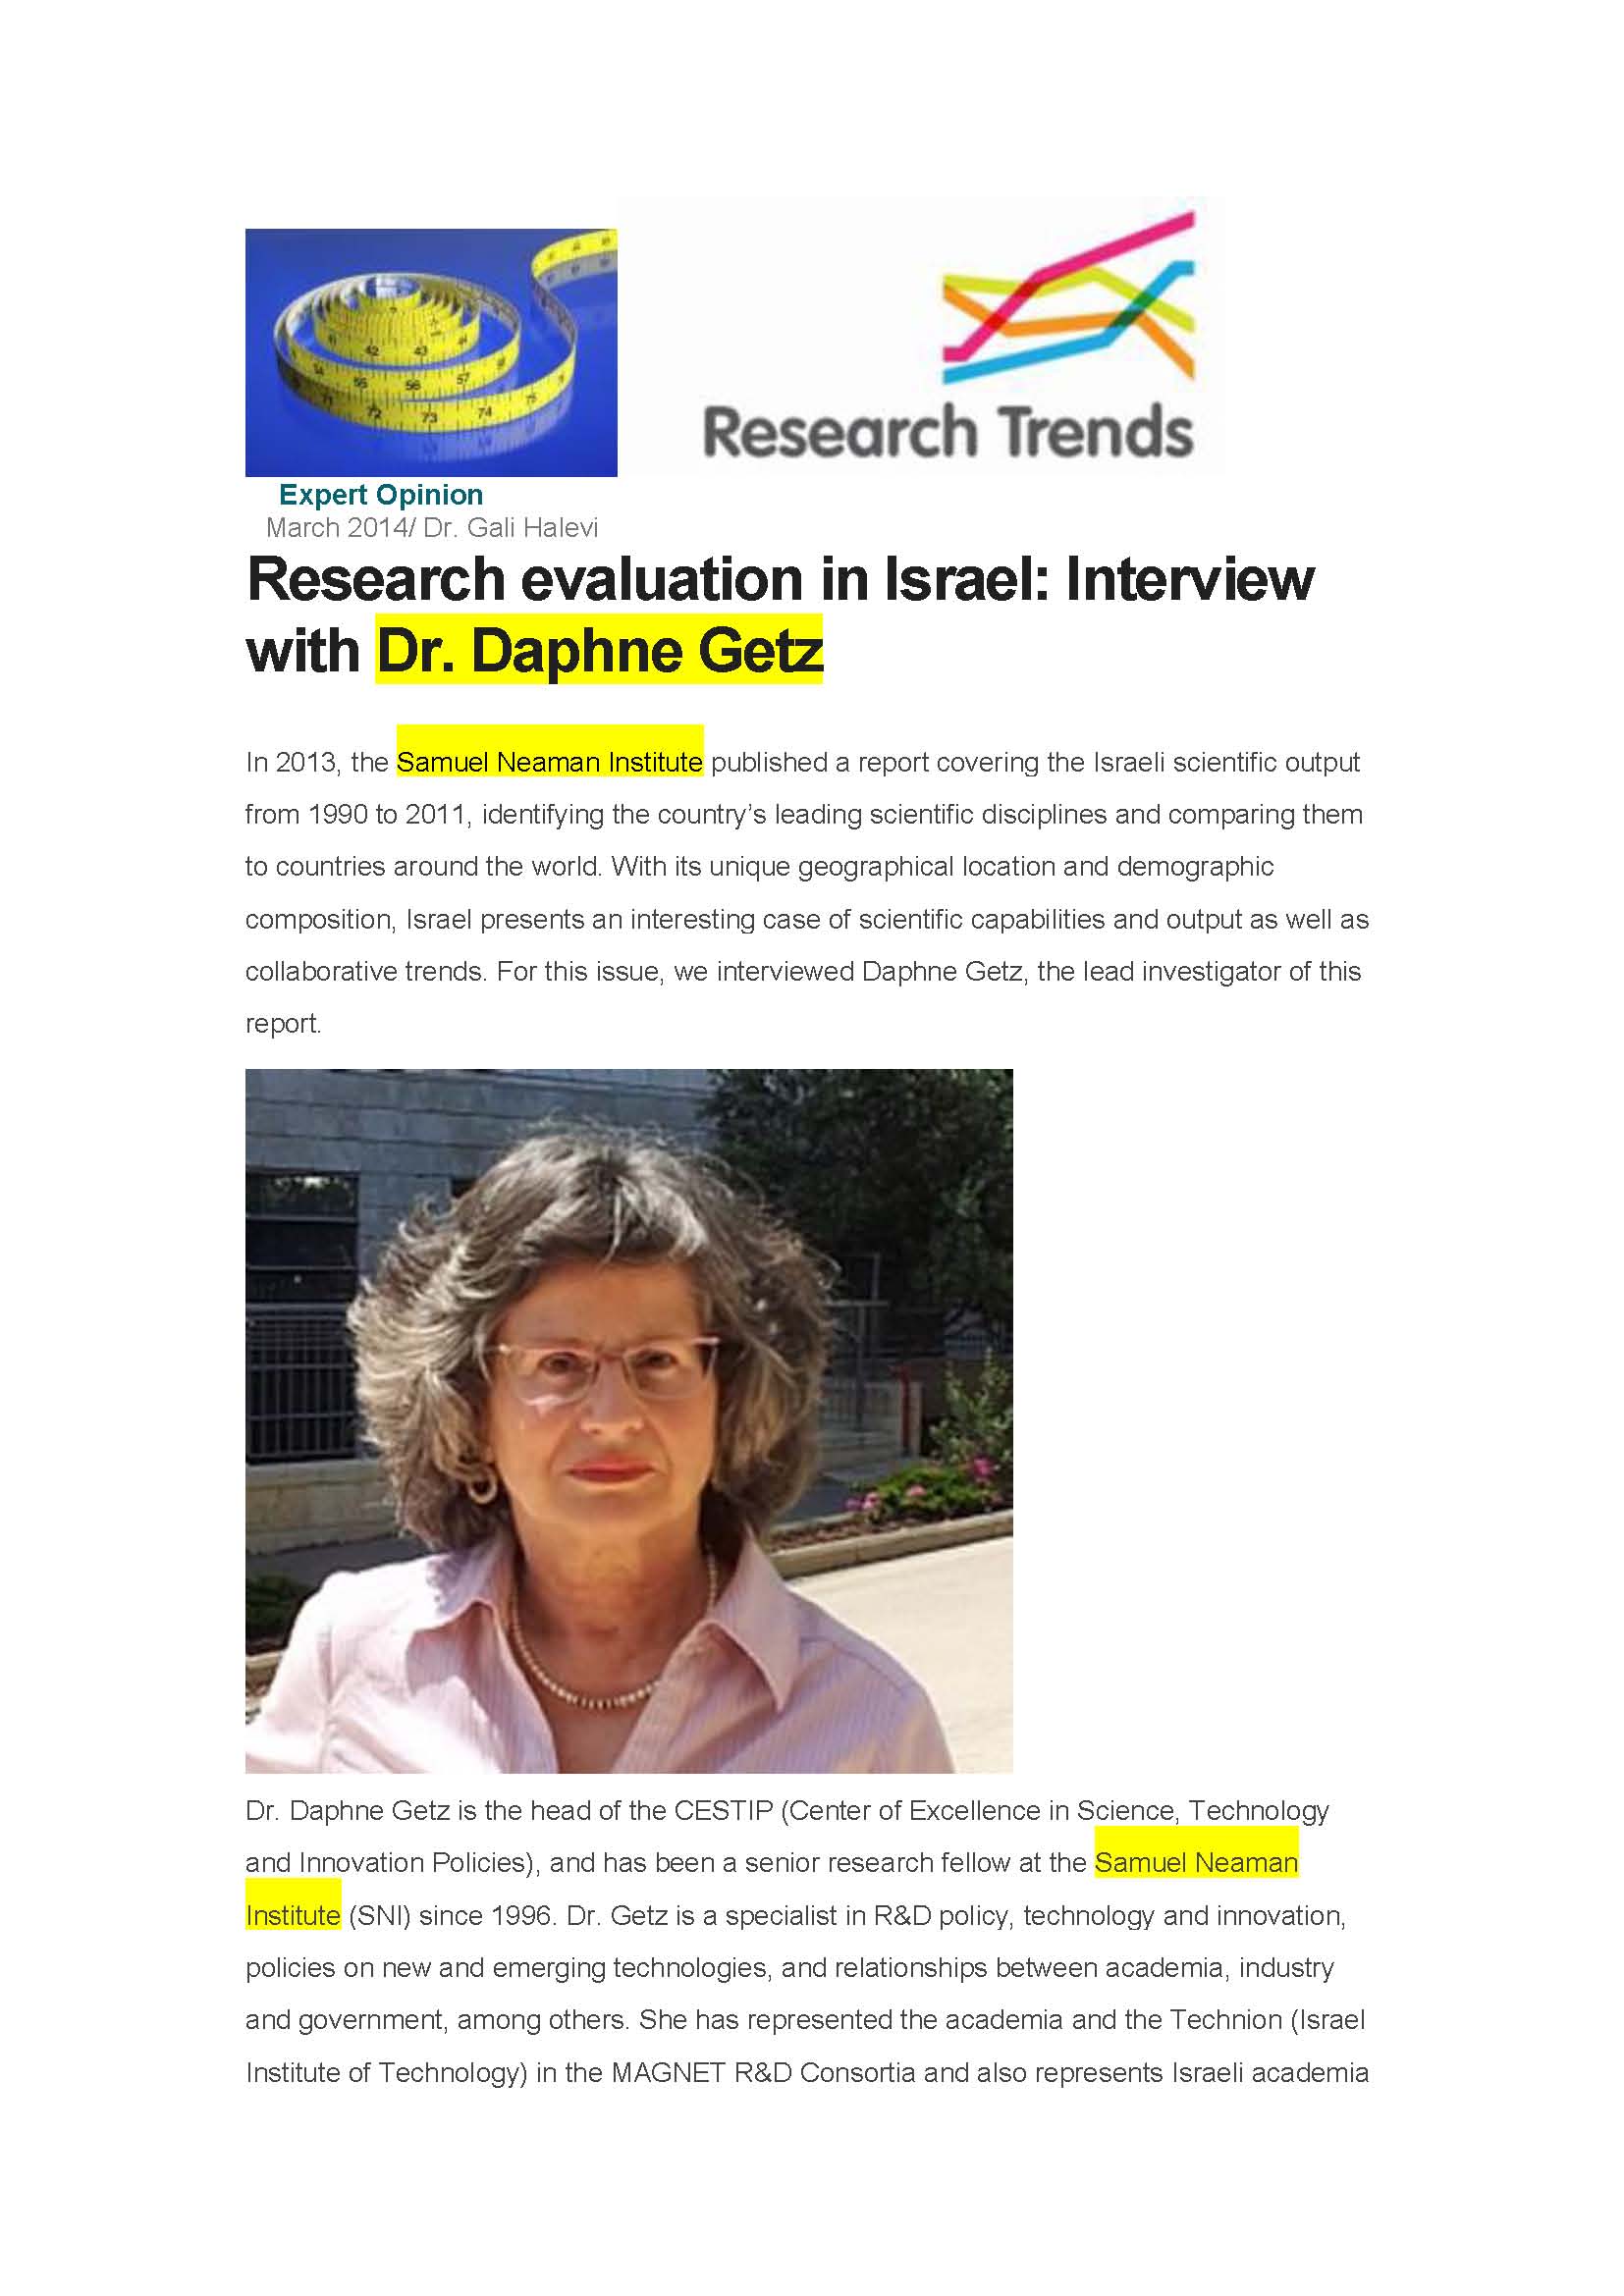 Research evaluation in Israel: Interview with Dr. Daphne Getz